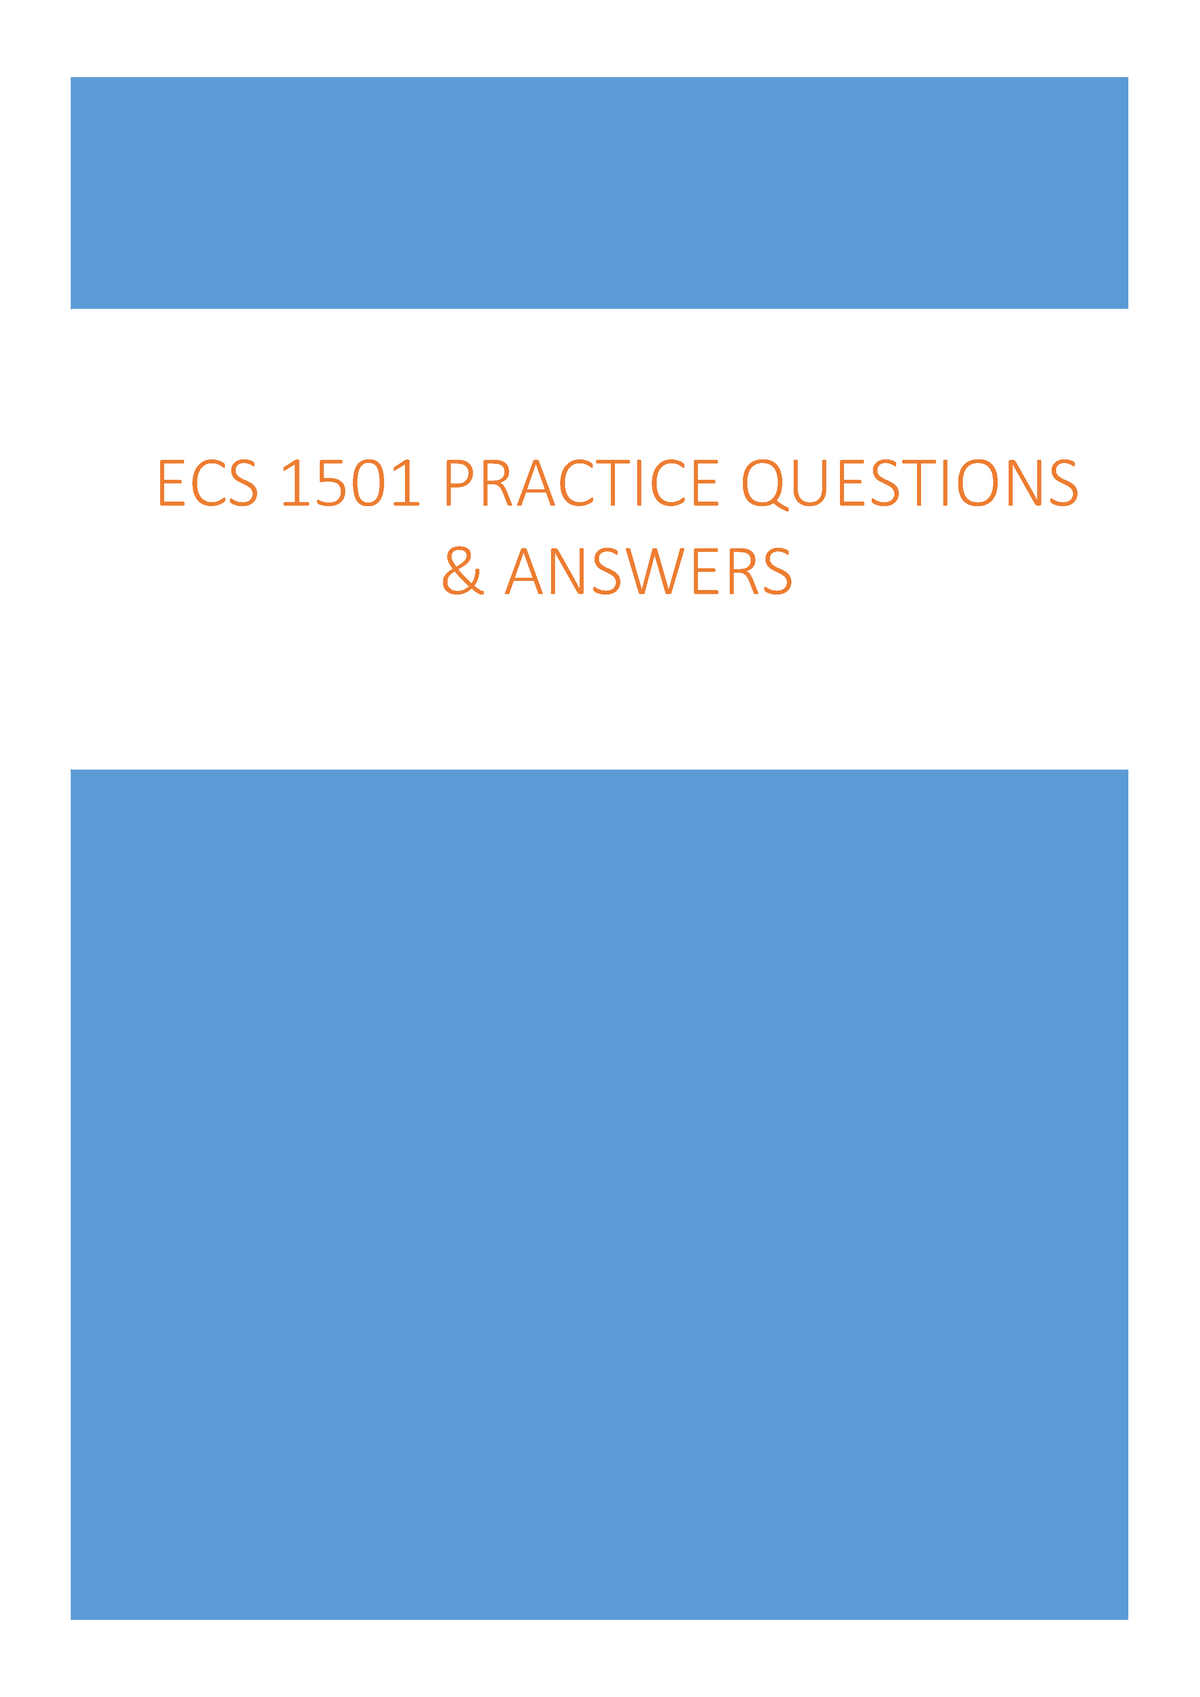 ecs1501 assignment 6 answers